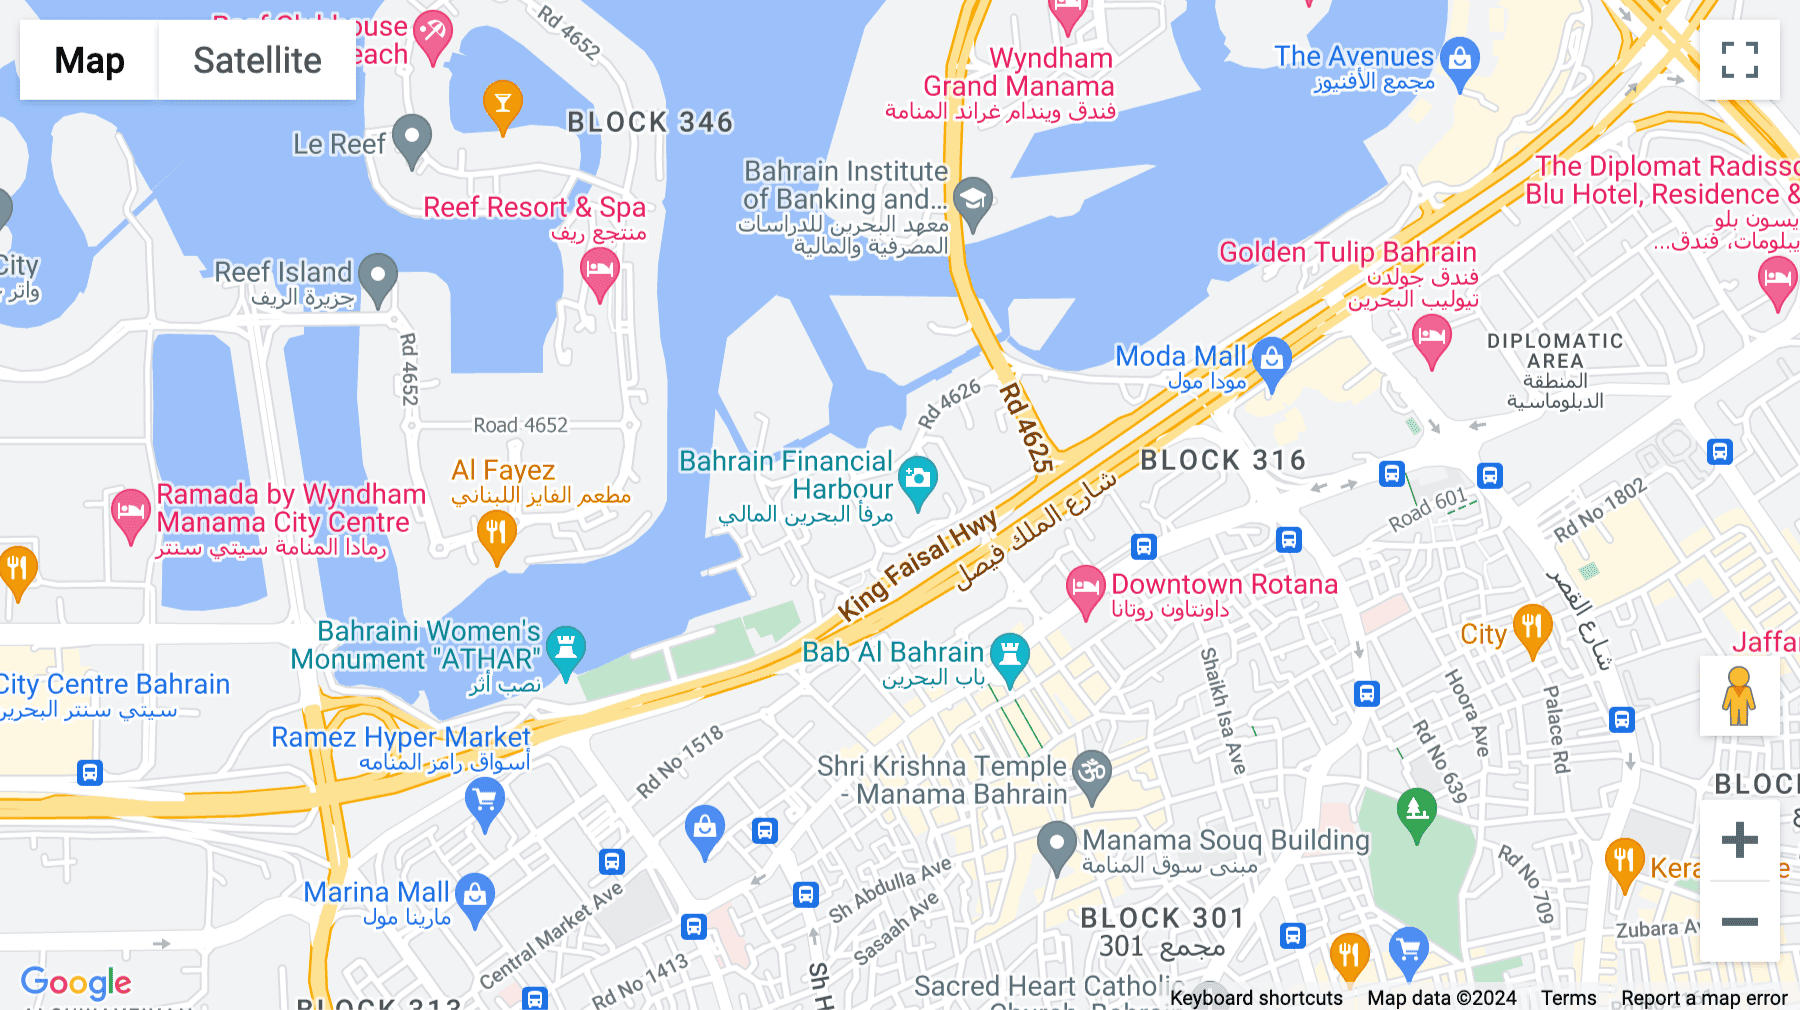 Click for interative map of East Tower, Bahrain Financial Harbour, Manama